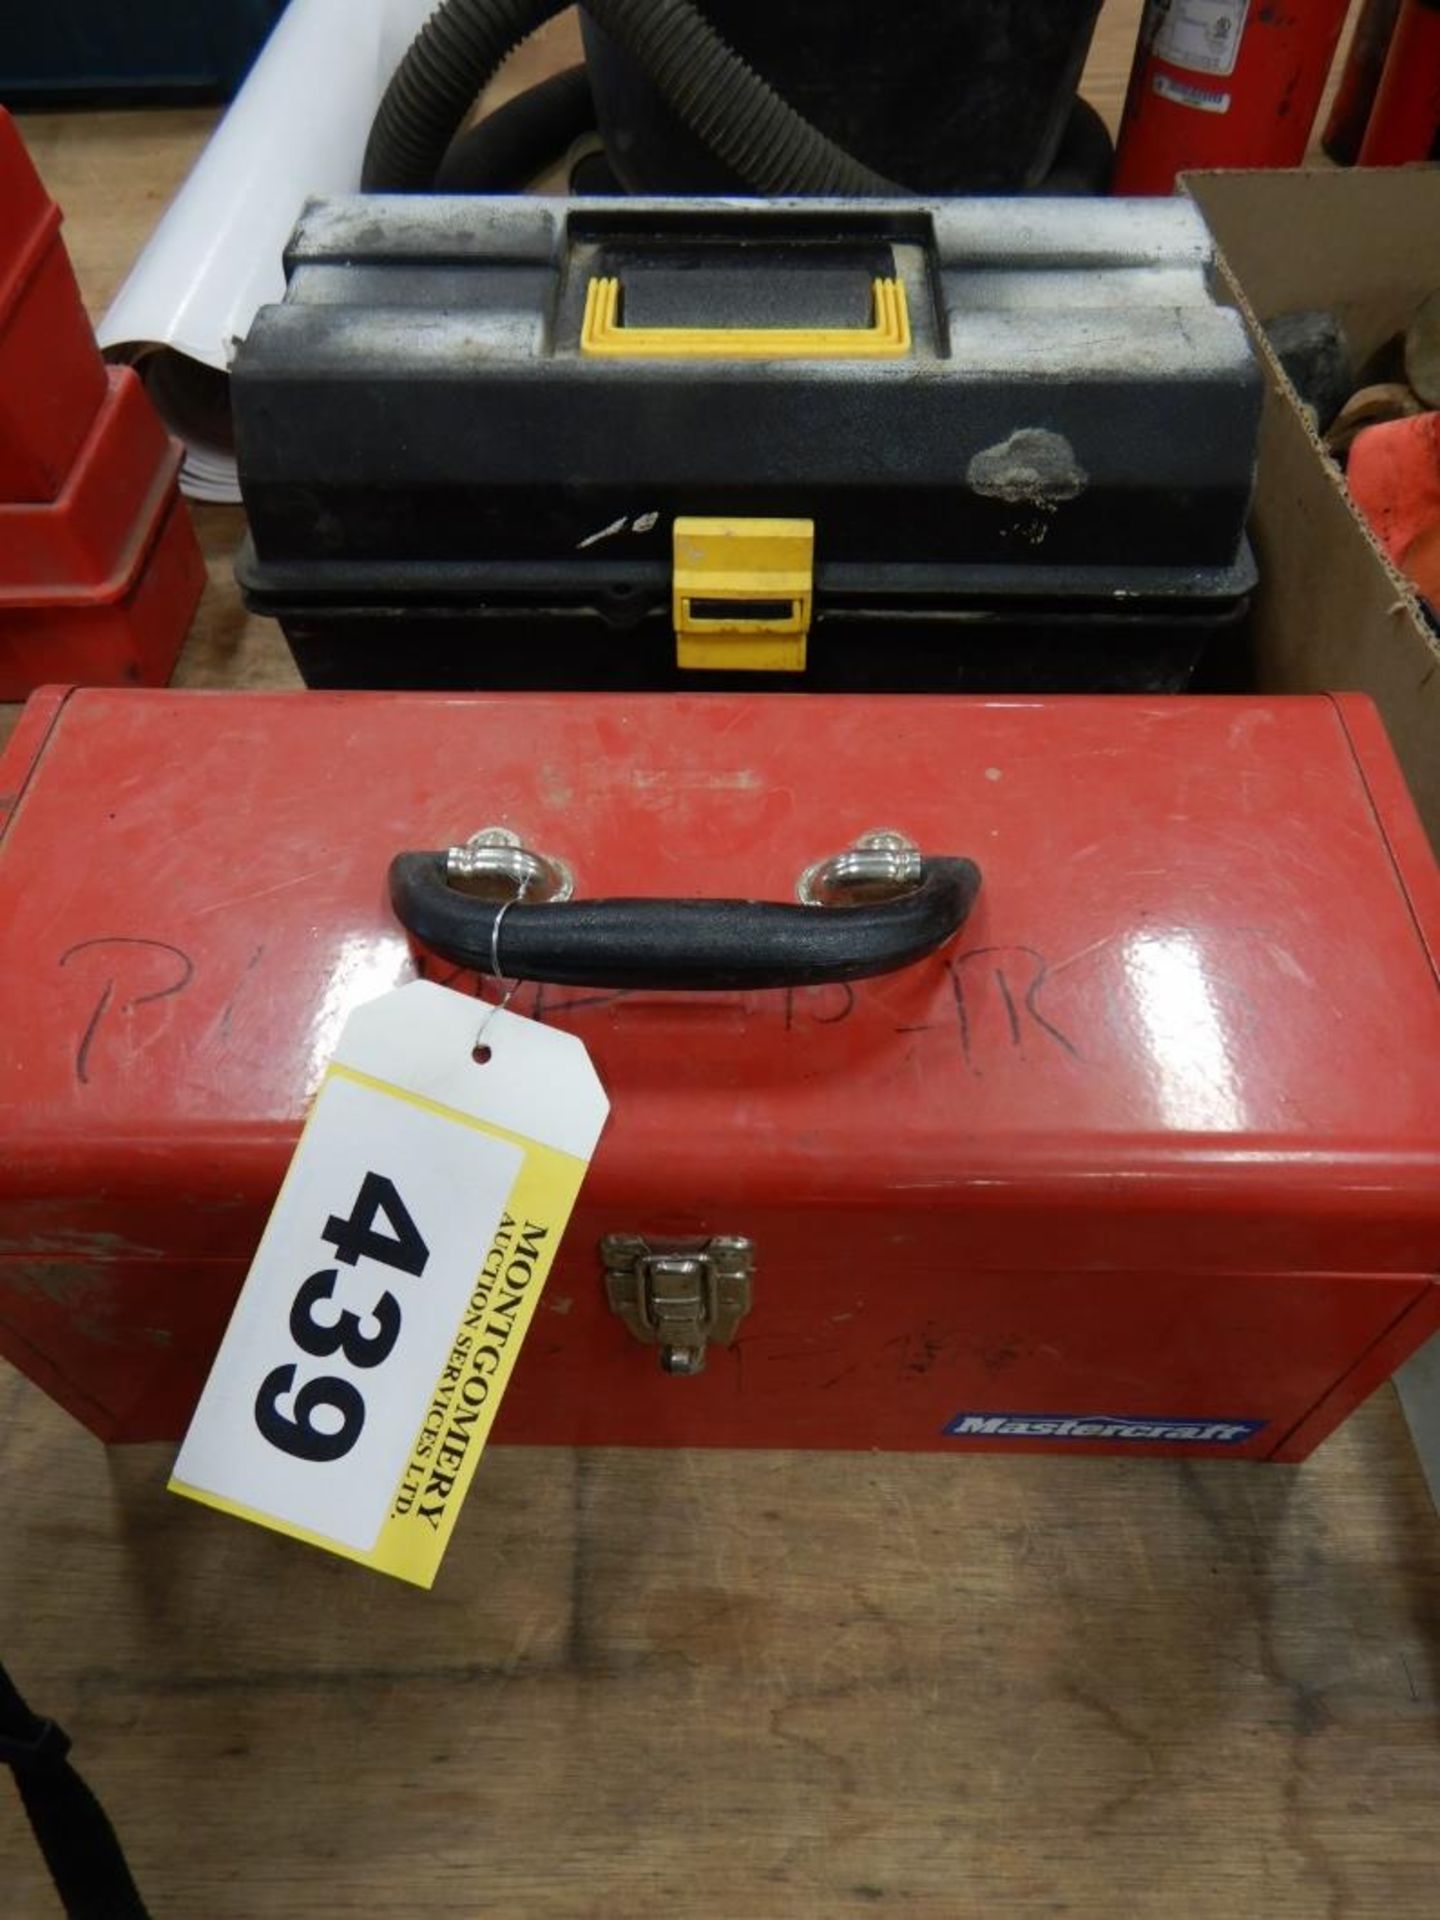 MASTERCRAFT STEEL AND 2-POLY TOOLBOXES W/ ASSORTED WRENCHES, PLIERS, HAND TOOLS, ETC.